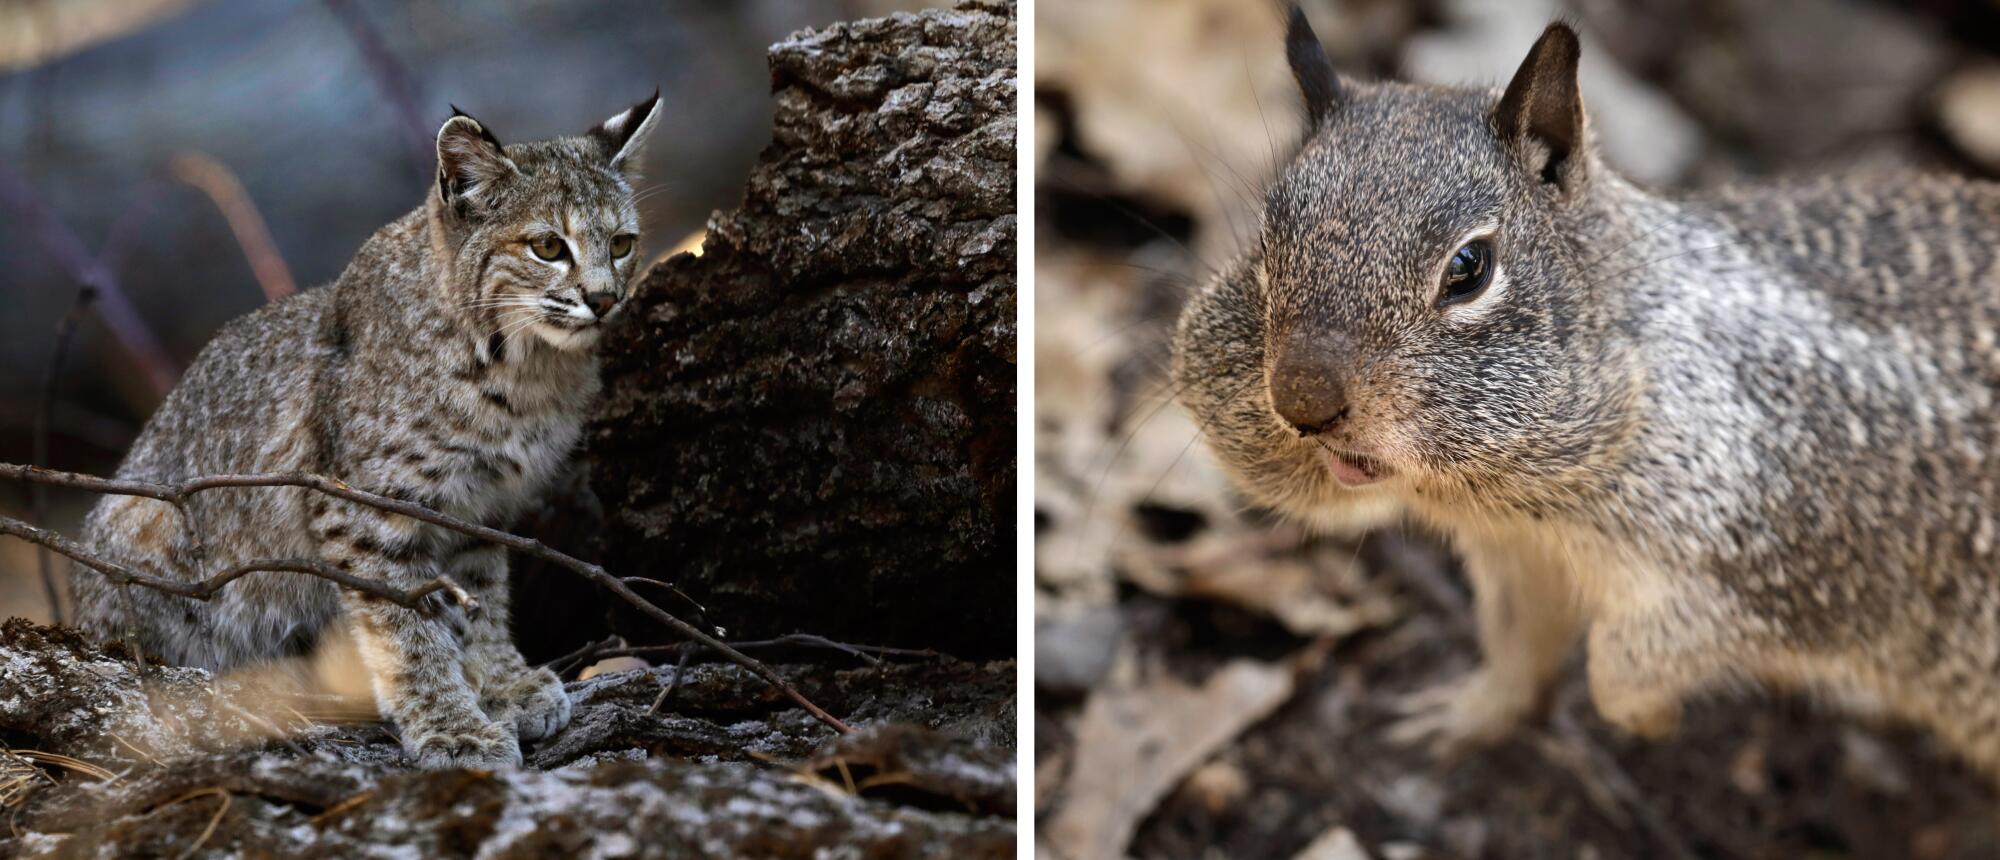 Diptych of a bobcat crouched next to a tree stump, and a closeup of a squirrel with its cheeks puffed out and full